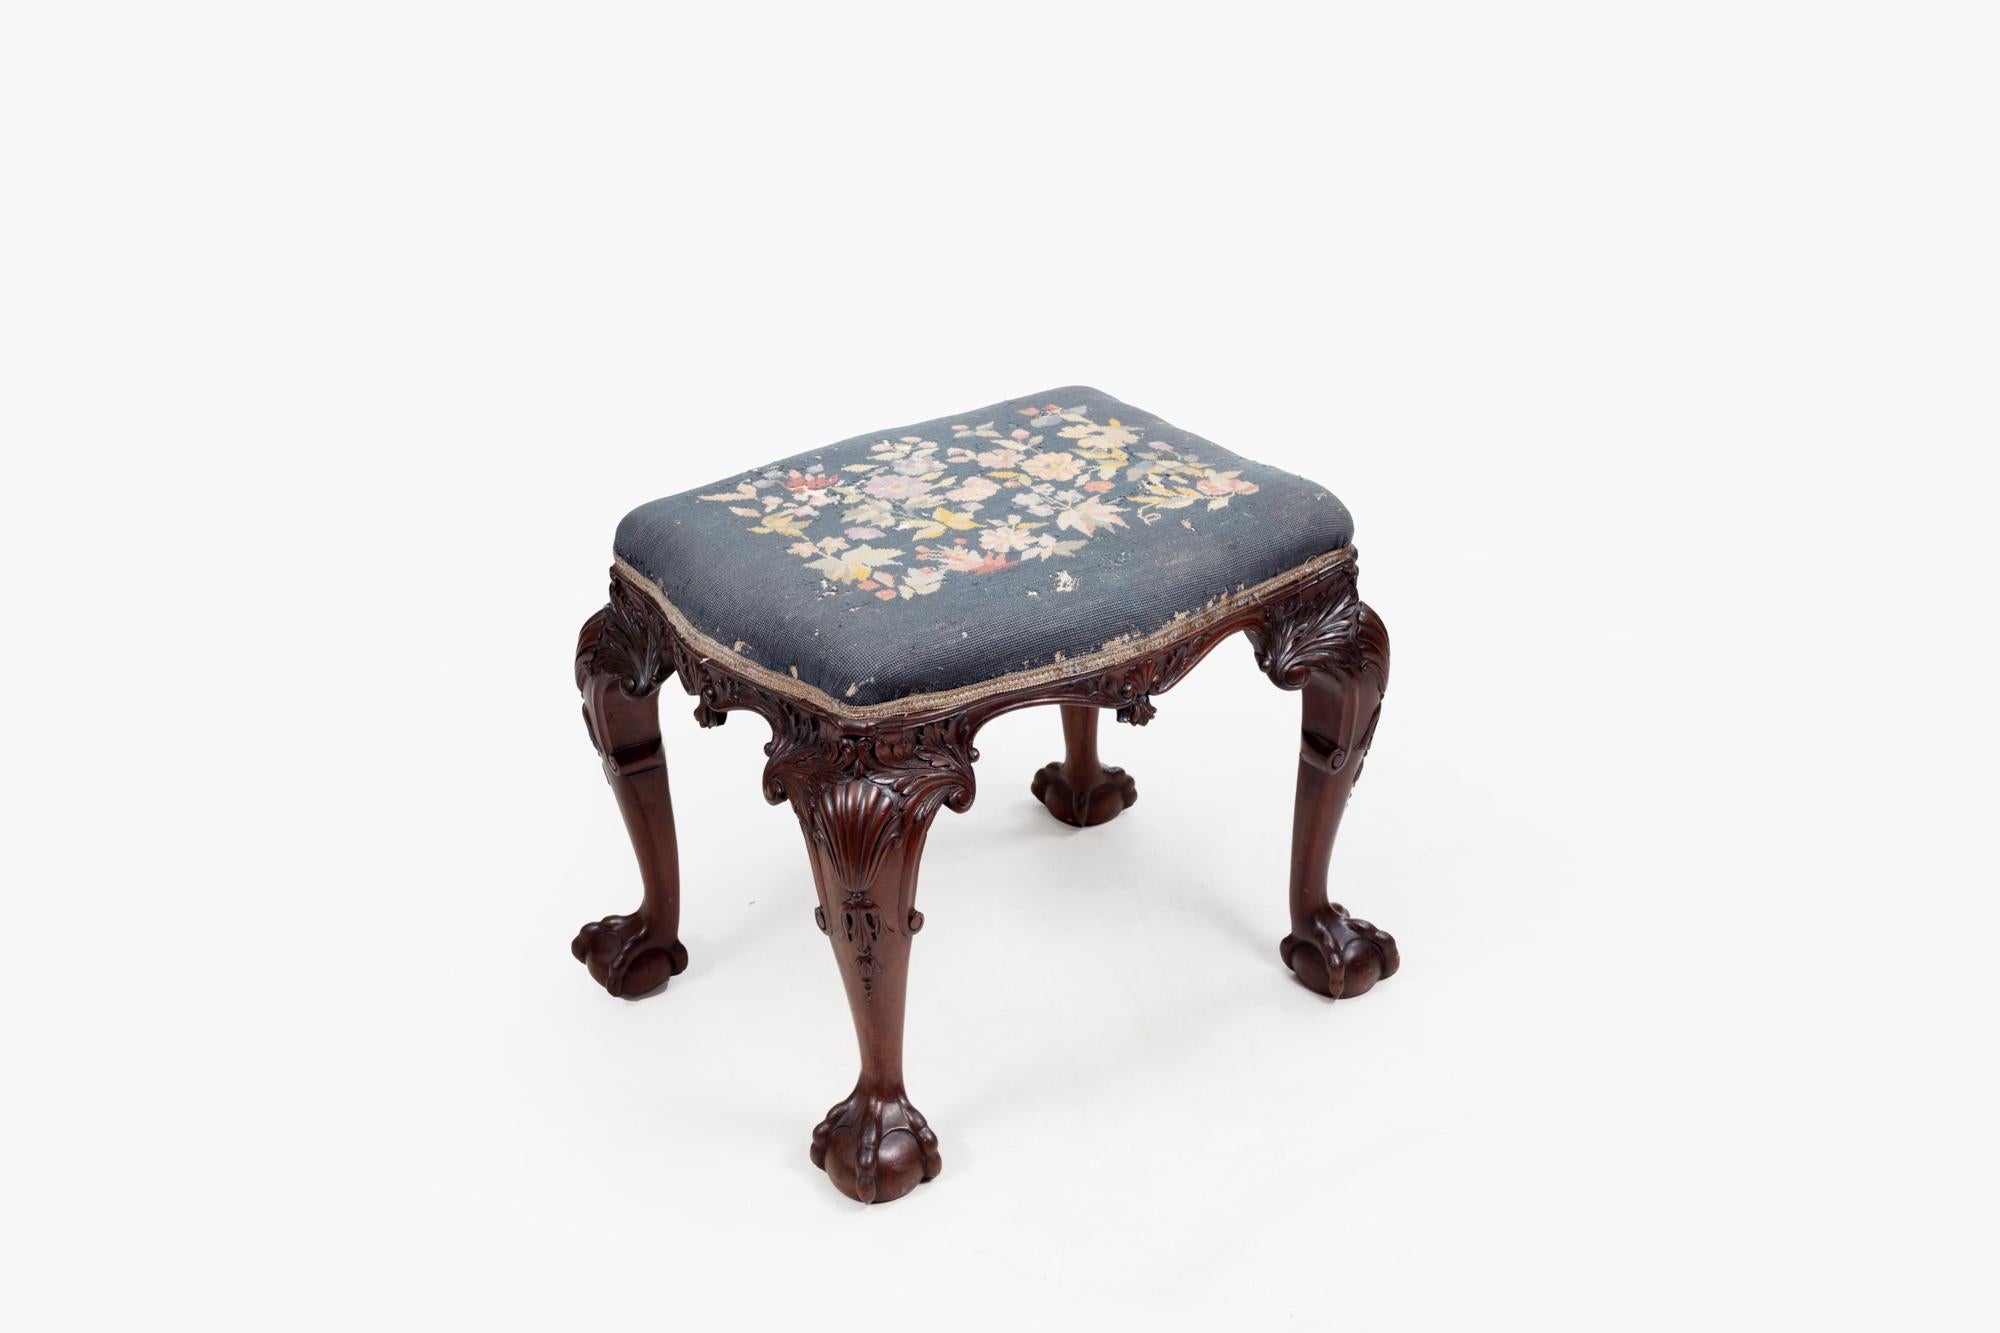 18th Century highly carved Irish cabriole leg stool with scrolling acanthus leaf and shell detail to the knees and terminating on four ball and claw feet. The top is upholstered with petit point embroidery needlework.